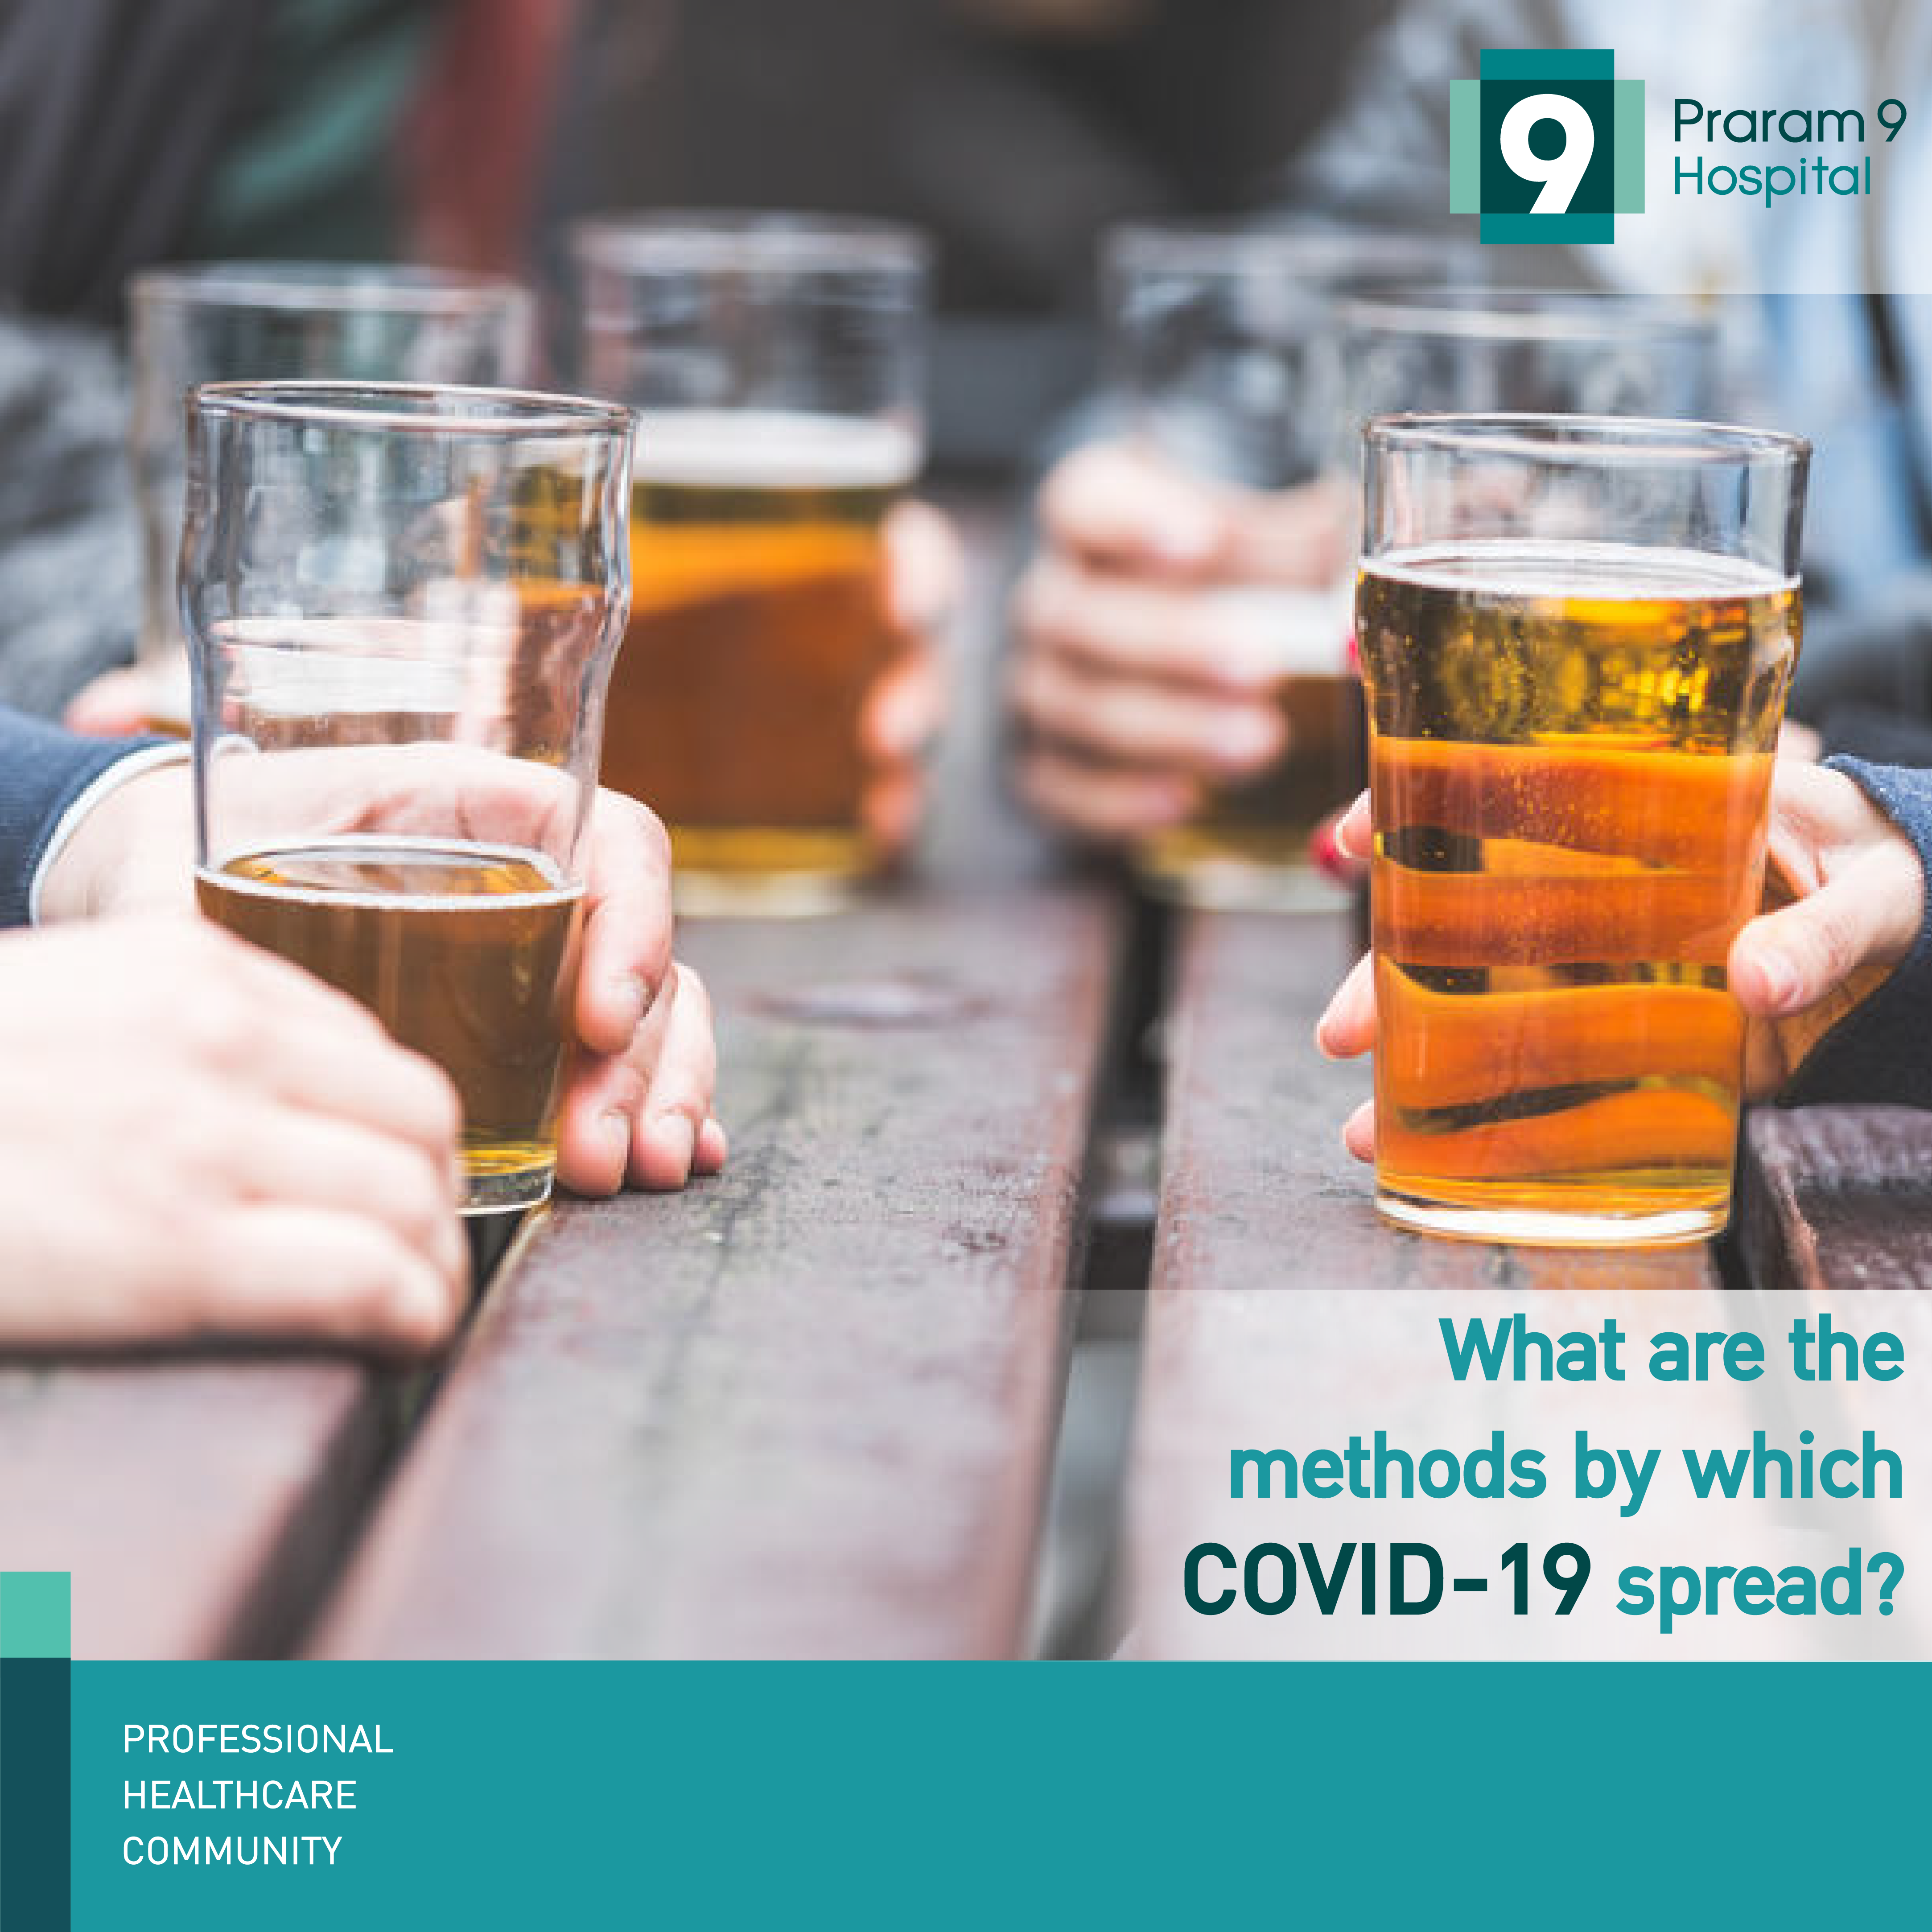 What are the methods by which COVID-19 spread